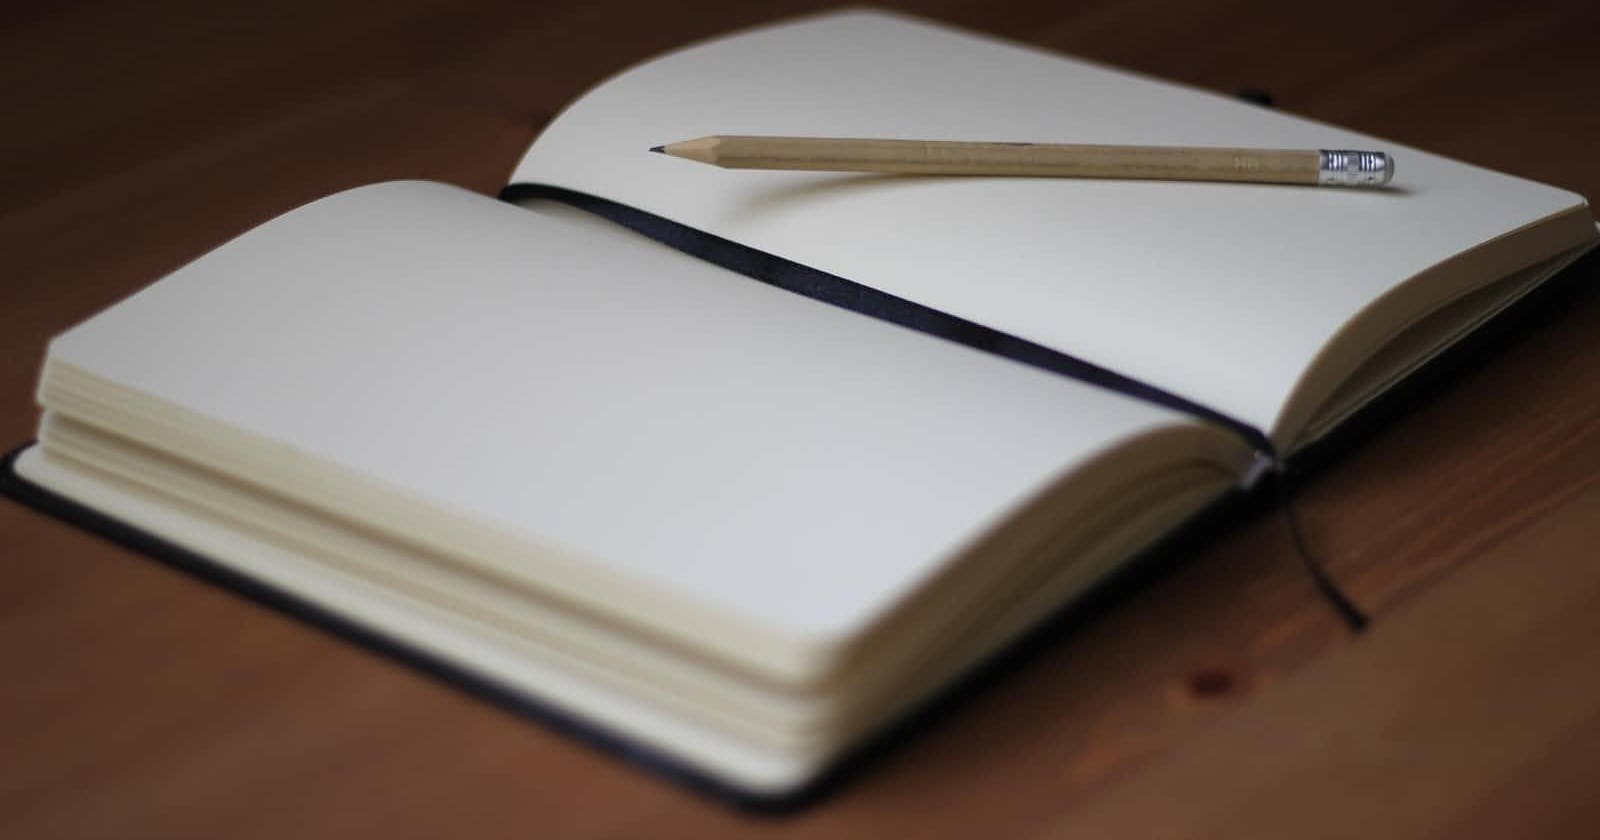 Why You Should Keep a Programming Journal